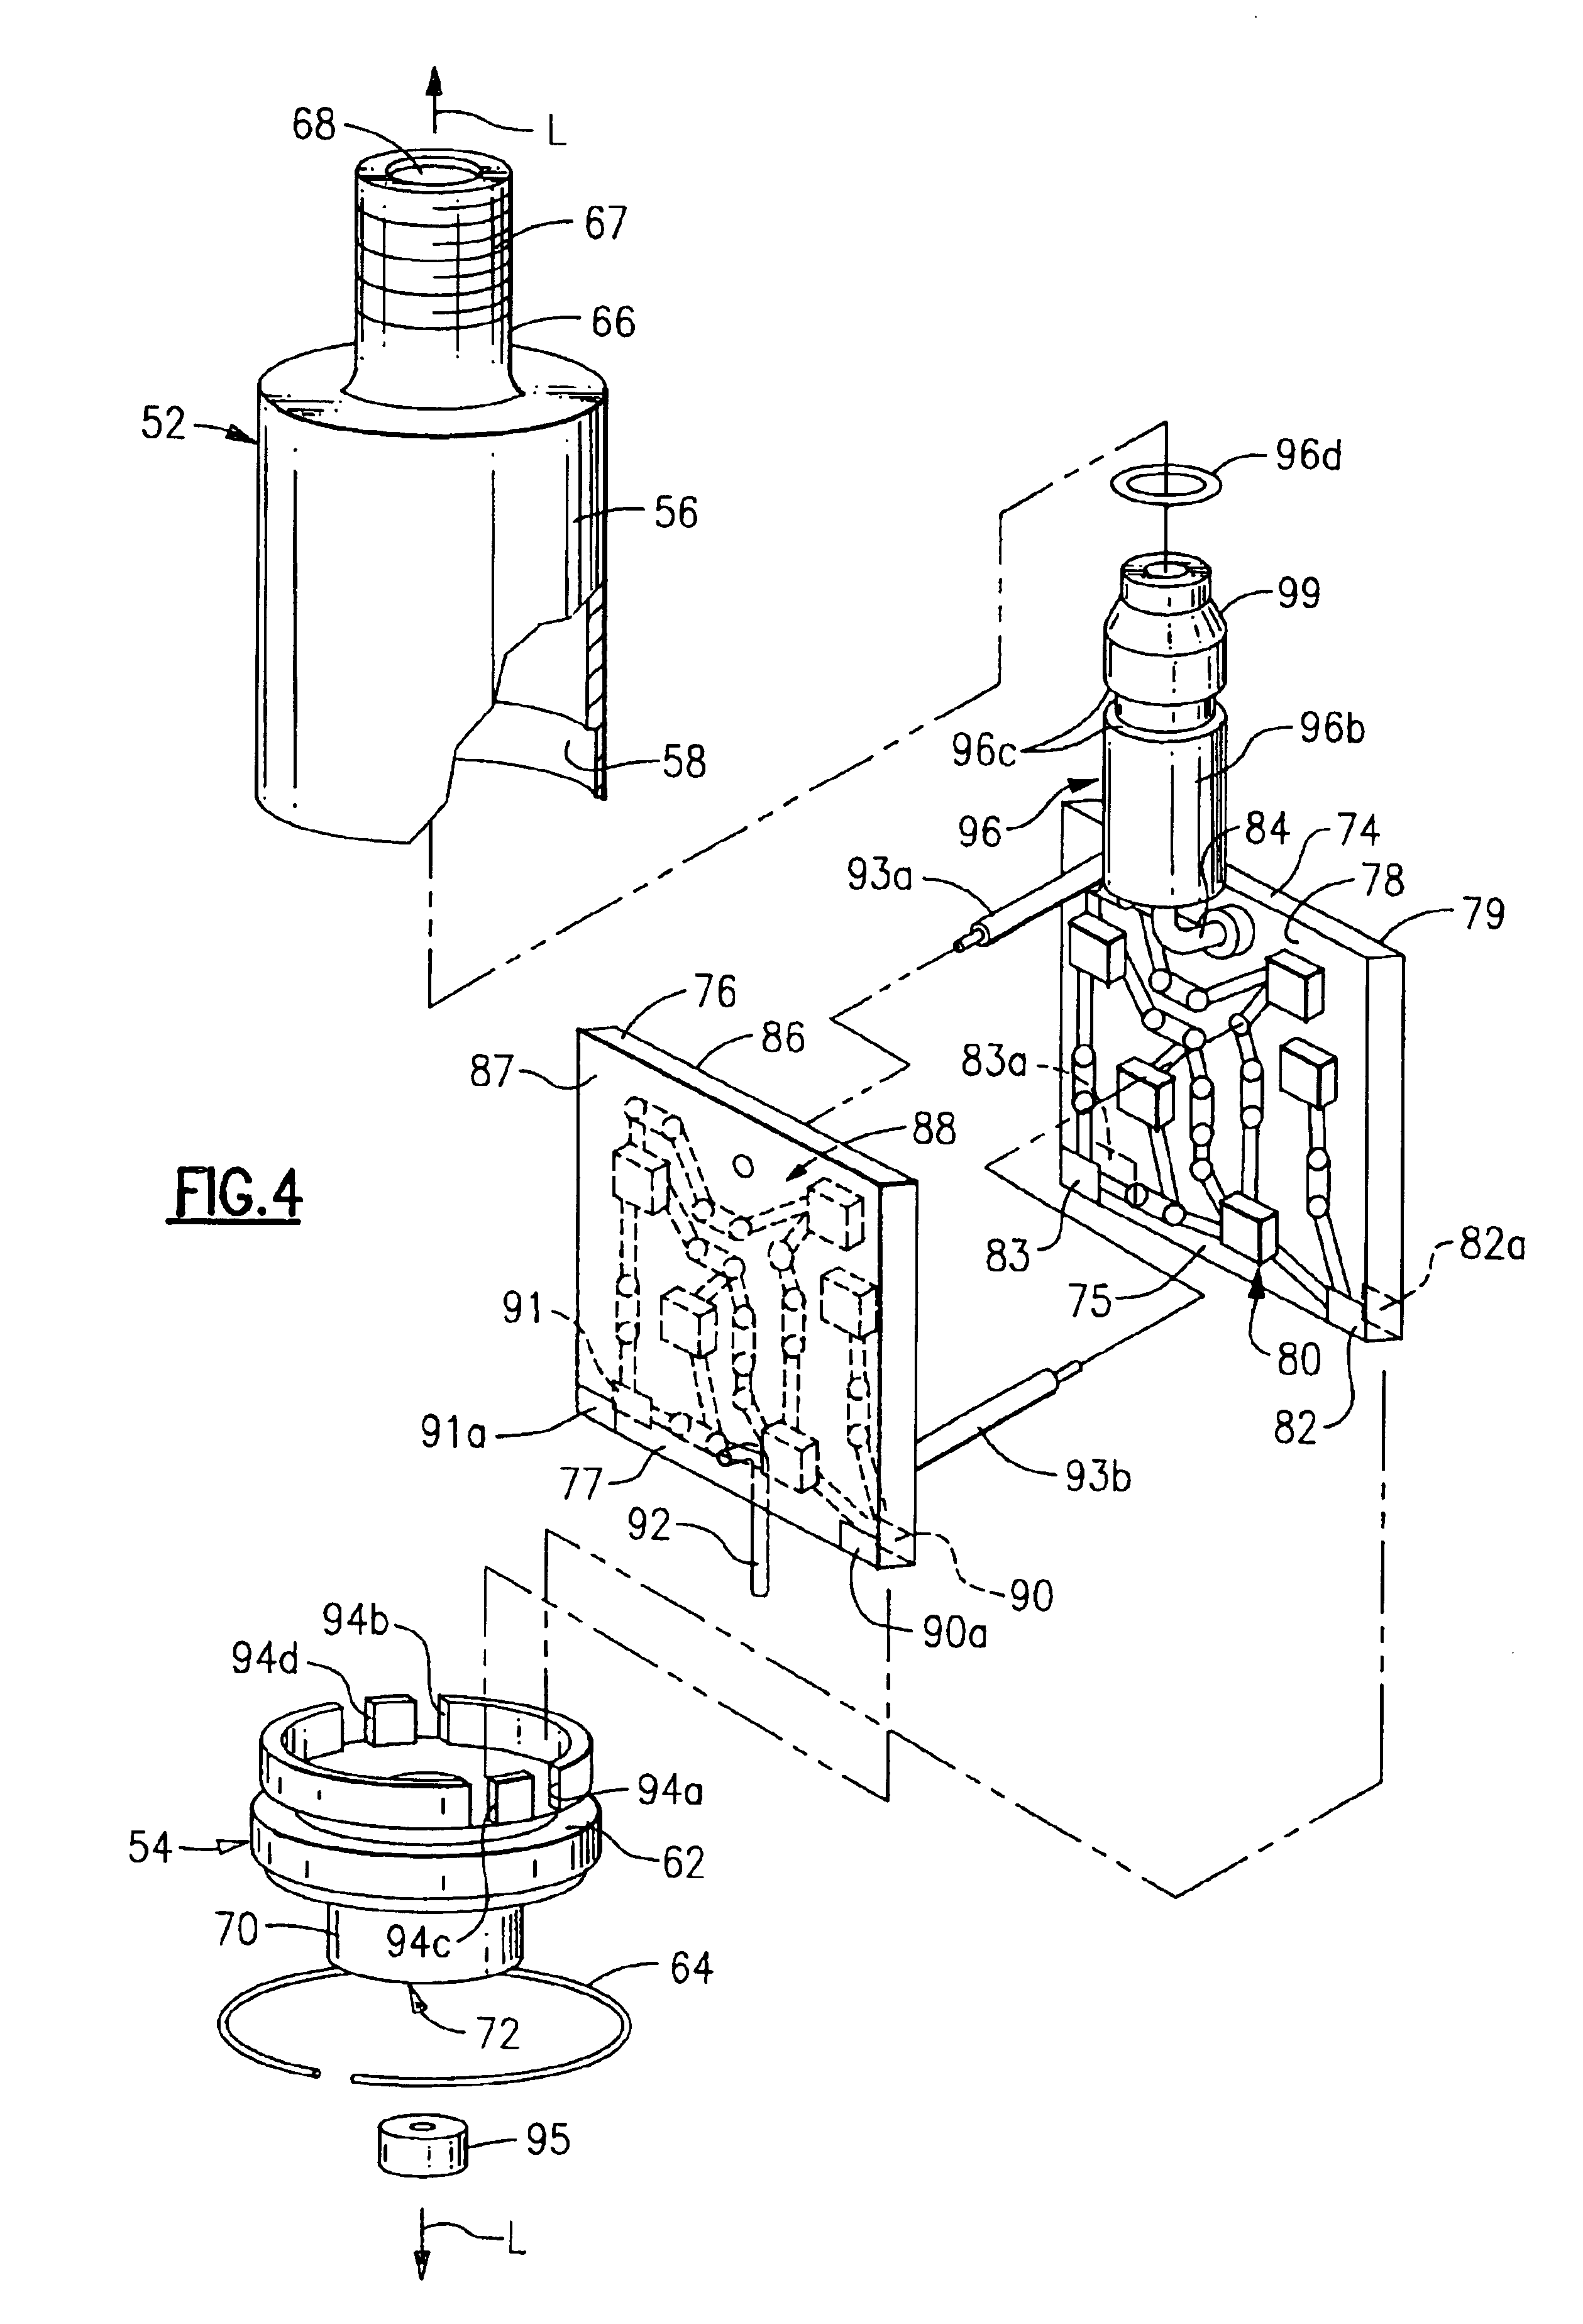 Electronic filter assembly